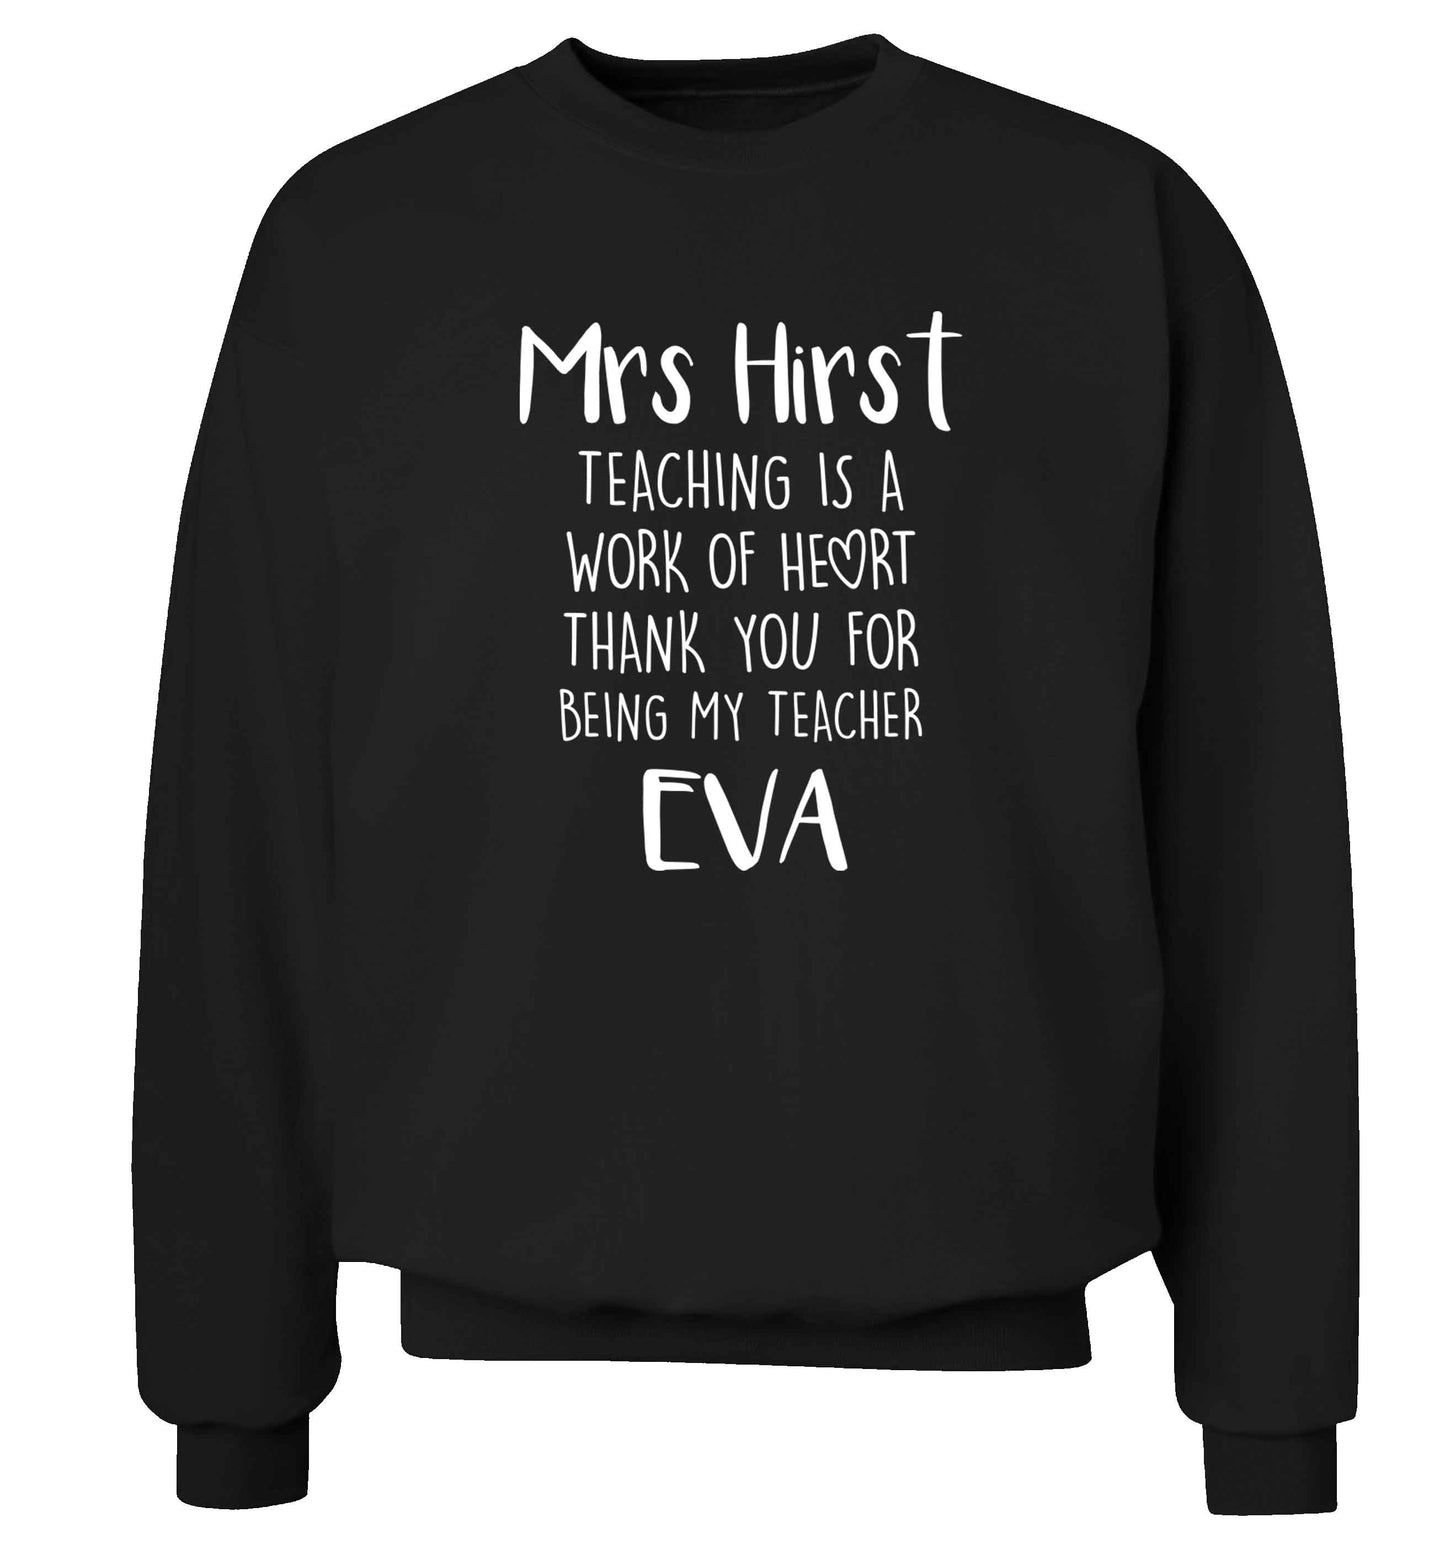 Personalised teaching is a work of heart thank you for being my teacher Adult's unisex black Sweater 2XL